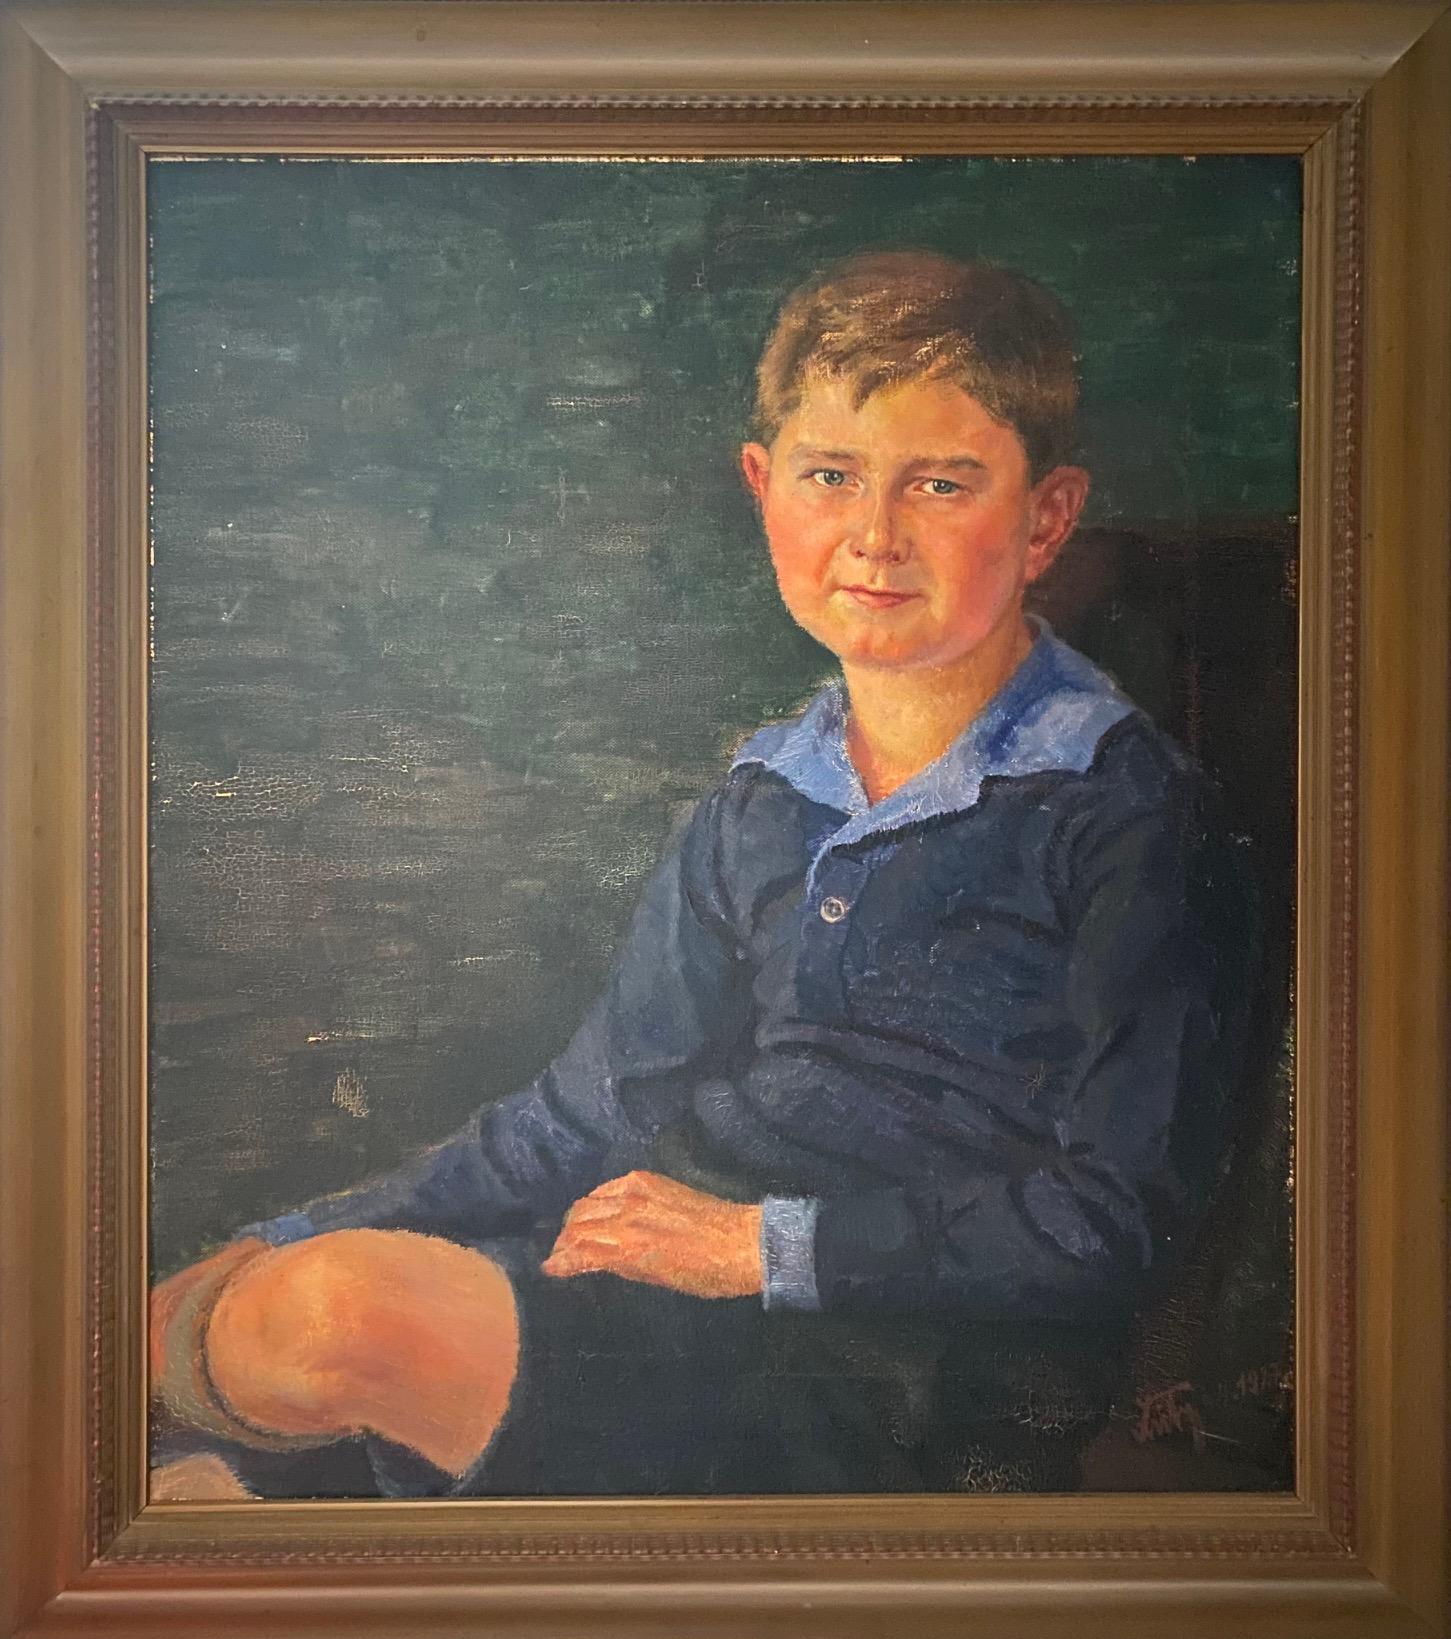 Young boy by Hannes Fritz-München - Oil on canvas 64x73 cm For Sale 1